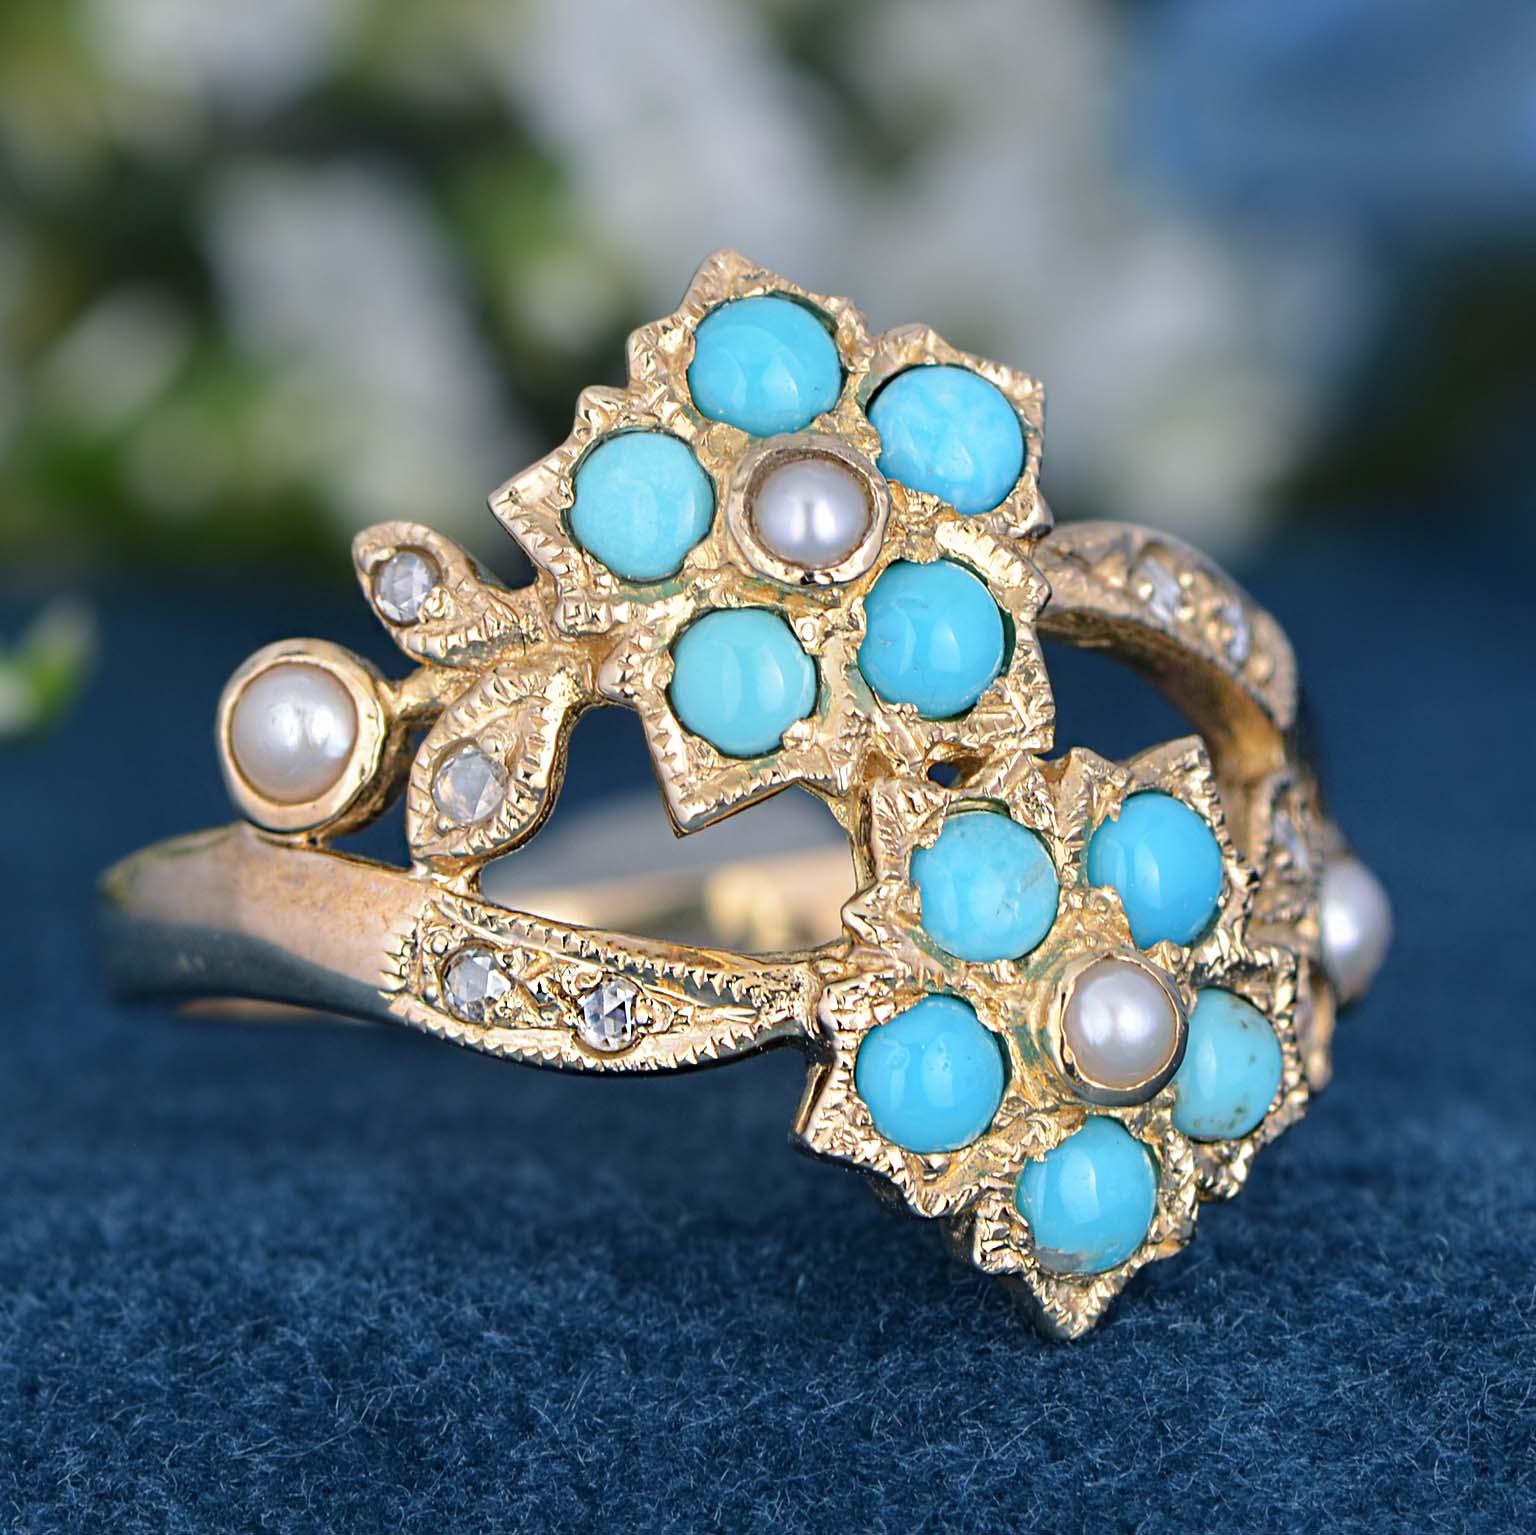 Add a delicate and unique aesthetic to your hand with this ring by GEMMA FILIGREE. Our antique design gold rings equate to delicacy and light openwork, while maintains strength for everyday wear for a lifetime.

This striking design ring with floral